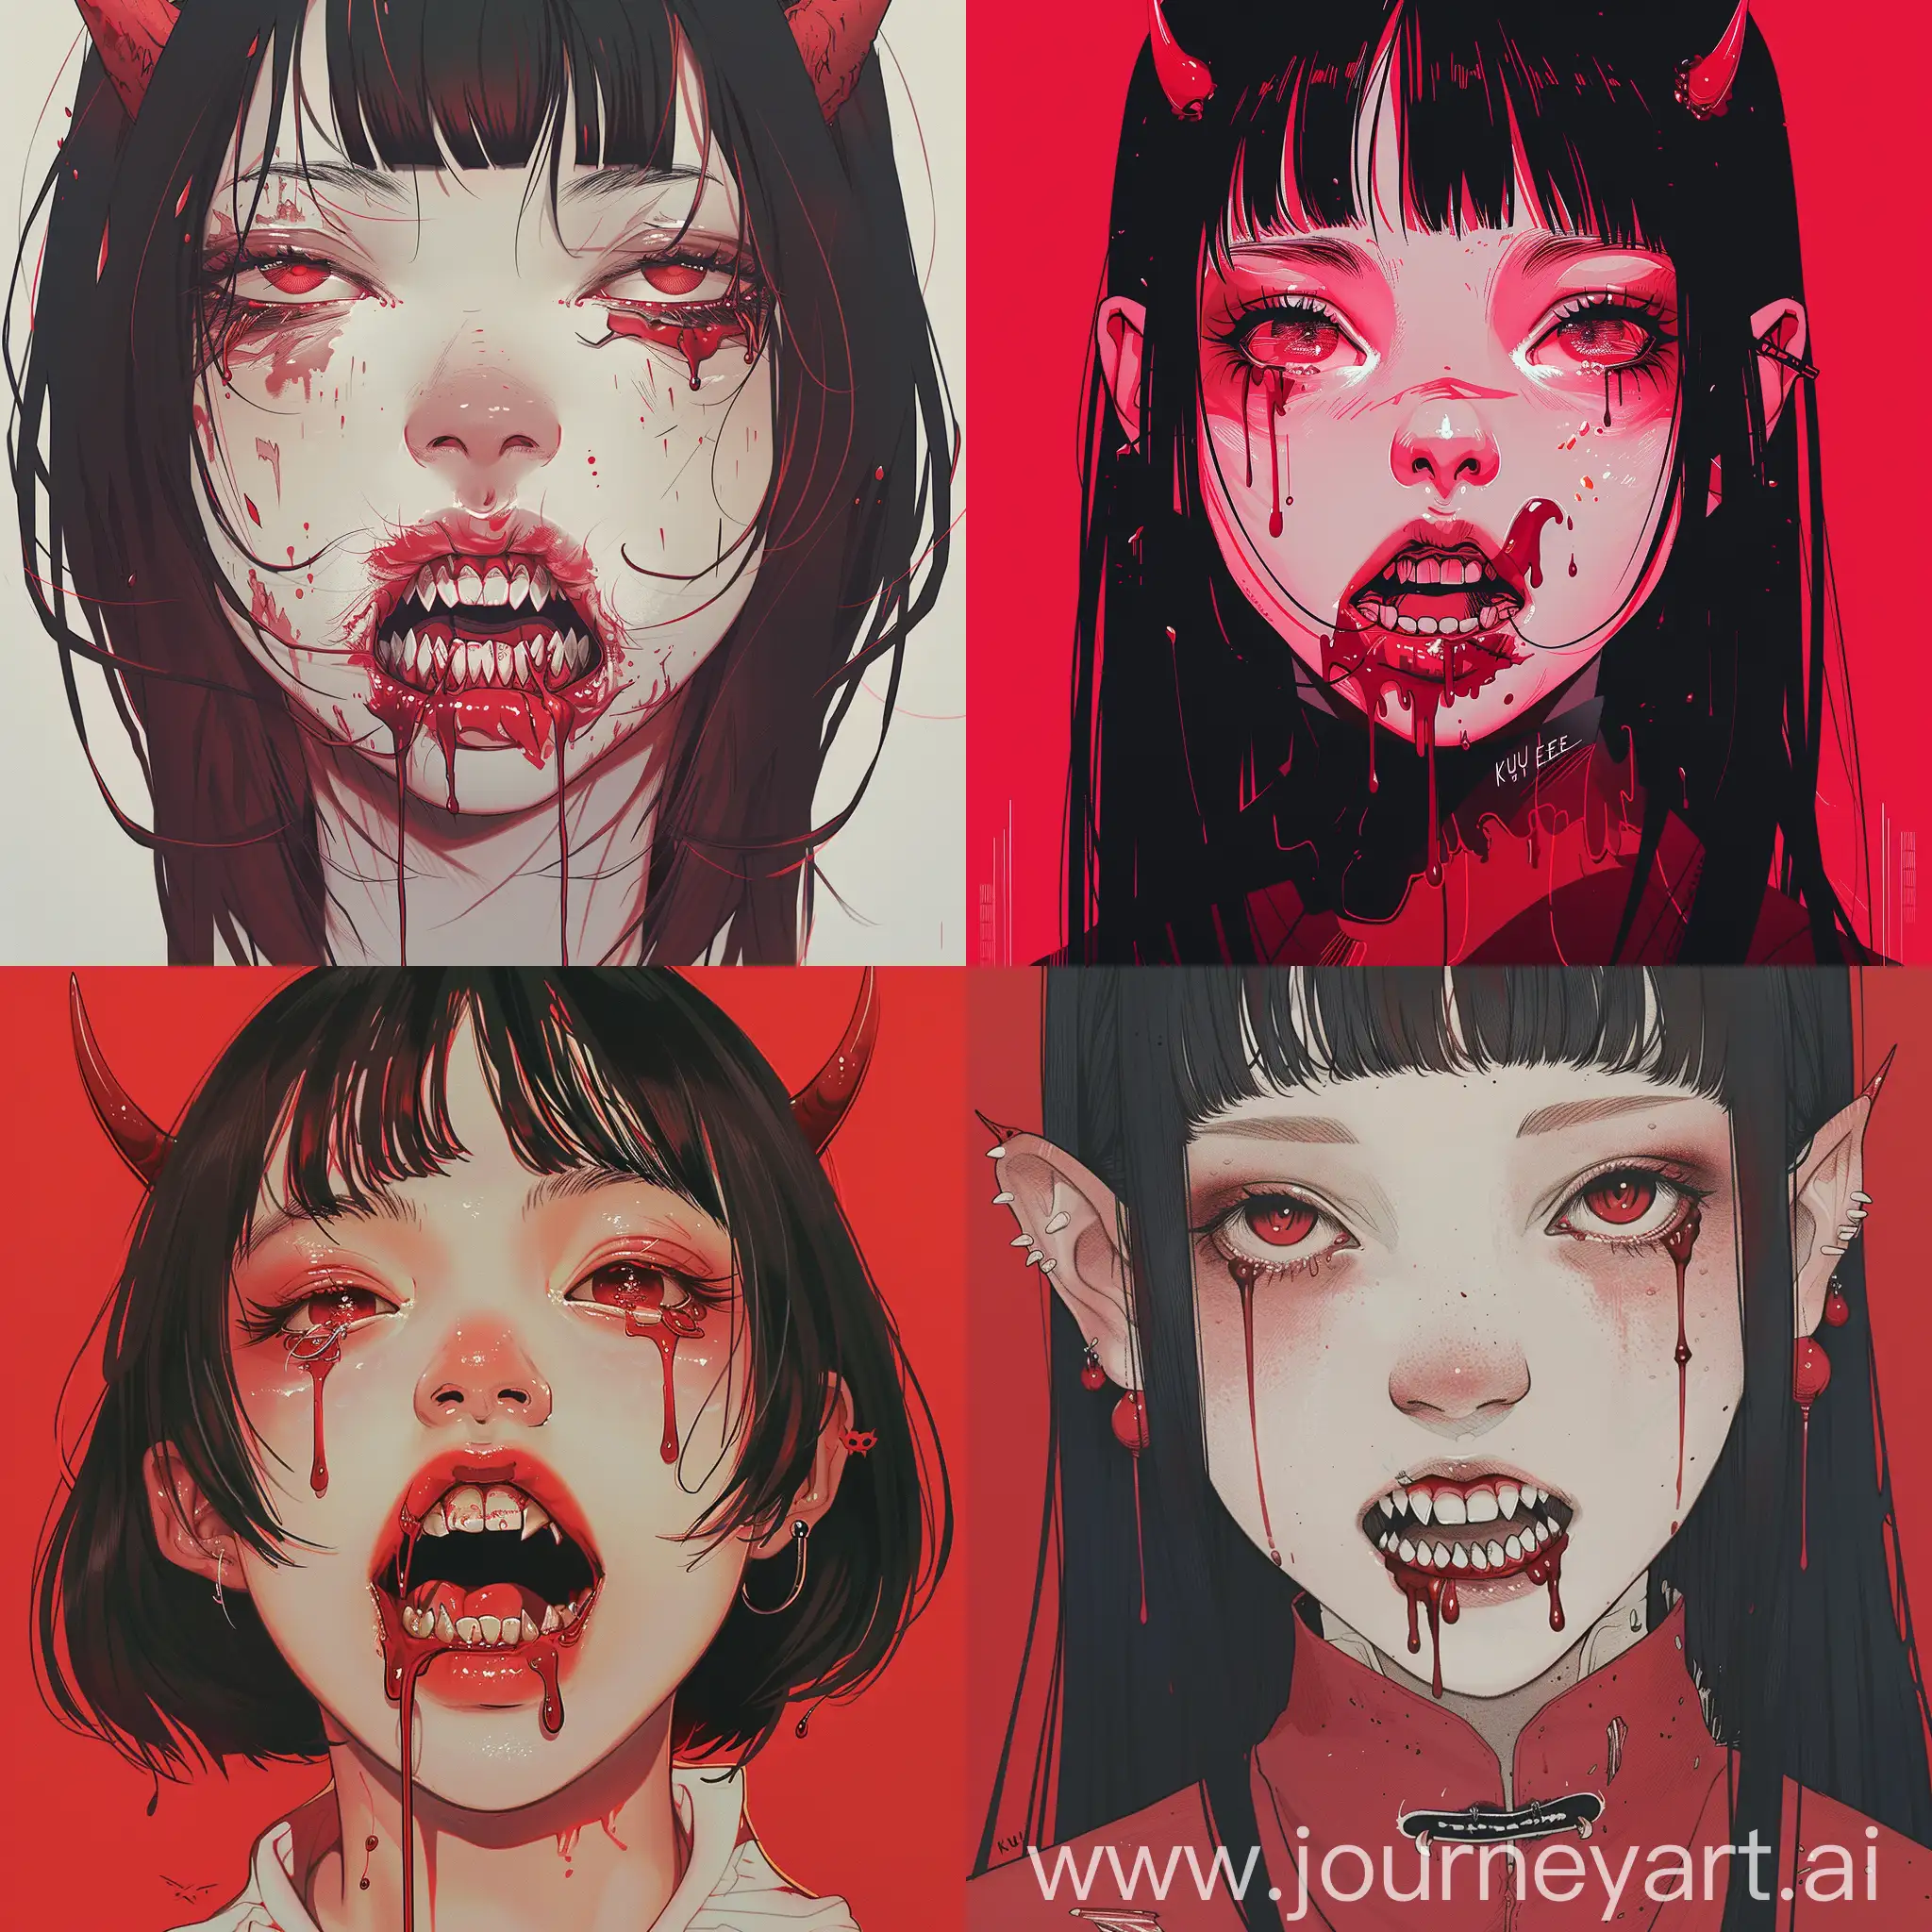 Illustration of a anime girl with scary teeth, crimson liquid dripping out of her mouth, crazy, madness, small red horns, red tones, art, illustration by Kyutae Lee